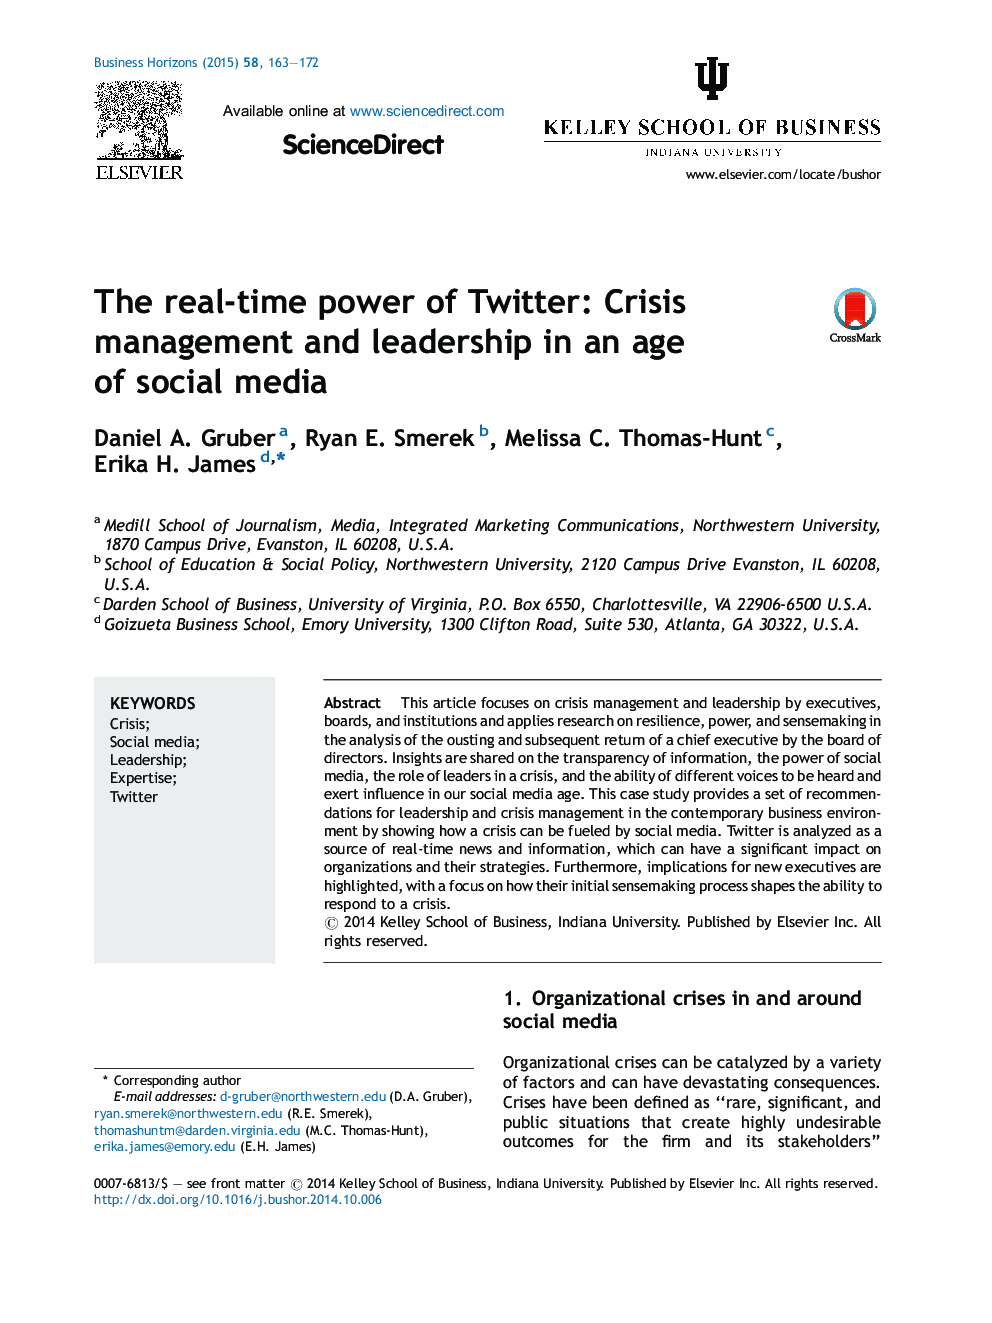 The real-time power of Twitter: Crisis management and leadership in an age of social media